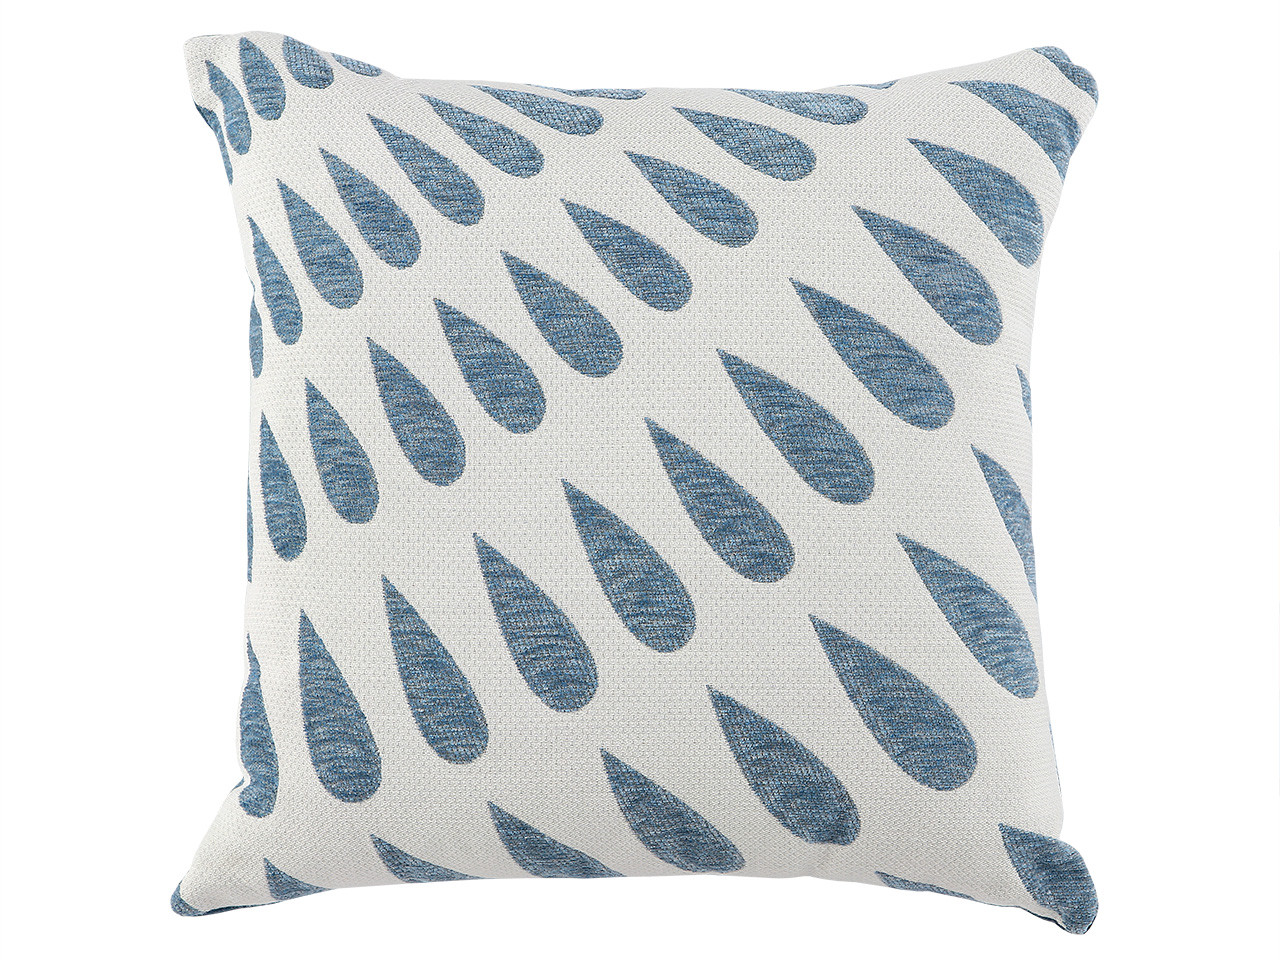 Arching Droplets Sunbrella 20 x 20 in. Throw Pillow